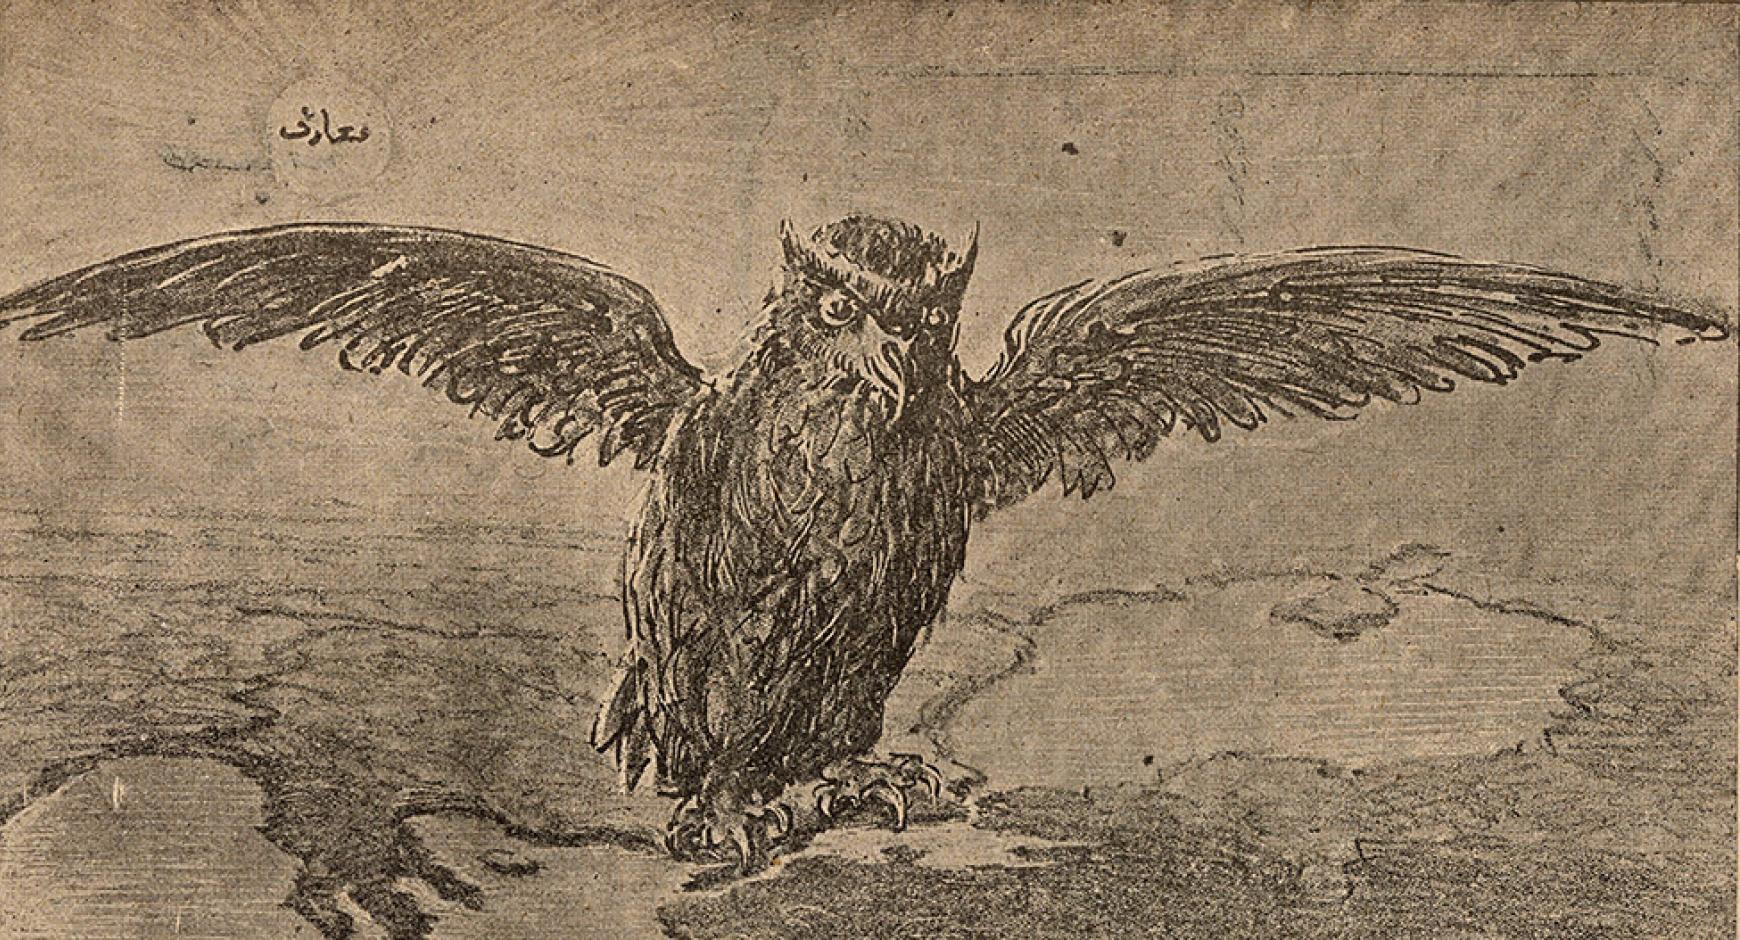 Esad Arseven, Celal and Cimcoz, Selah, “The Owl of Ignorance.” 1908.